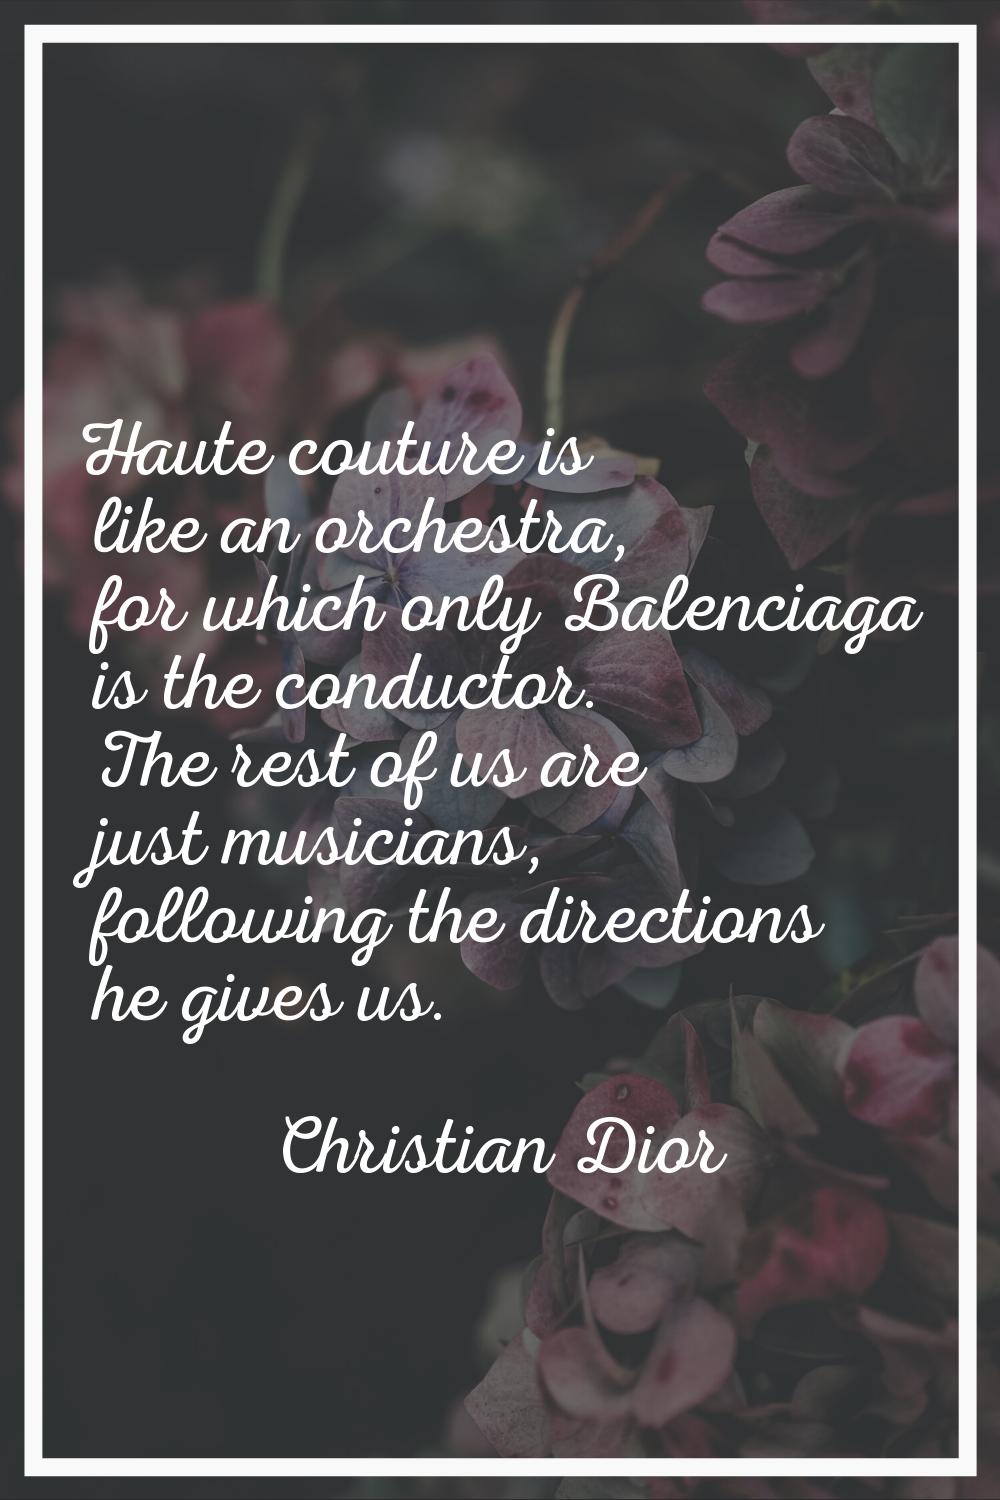 Haute couture is like an orchestra, for which only Balenciaga is the conductor. The rest of us are 